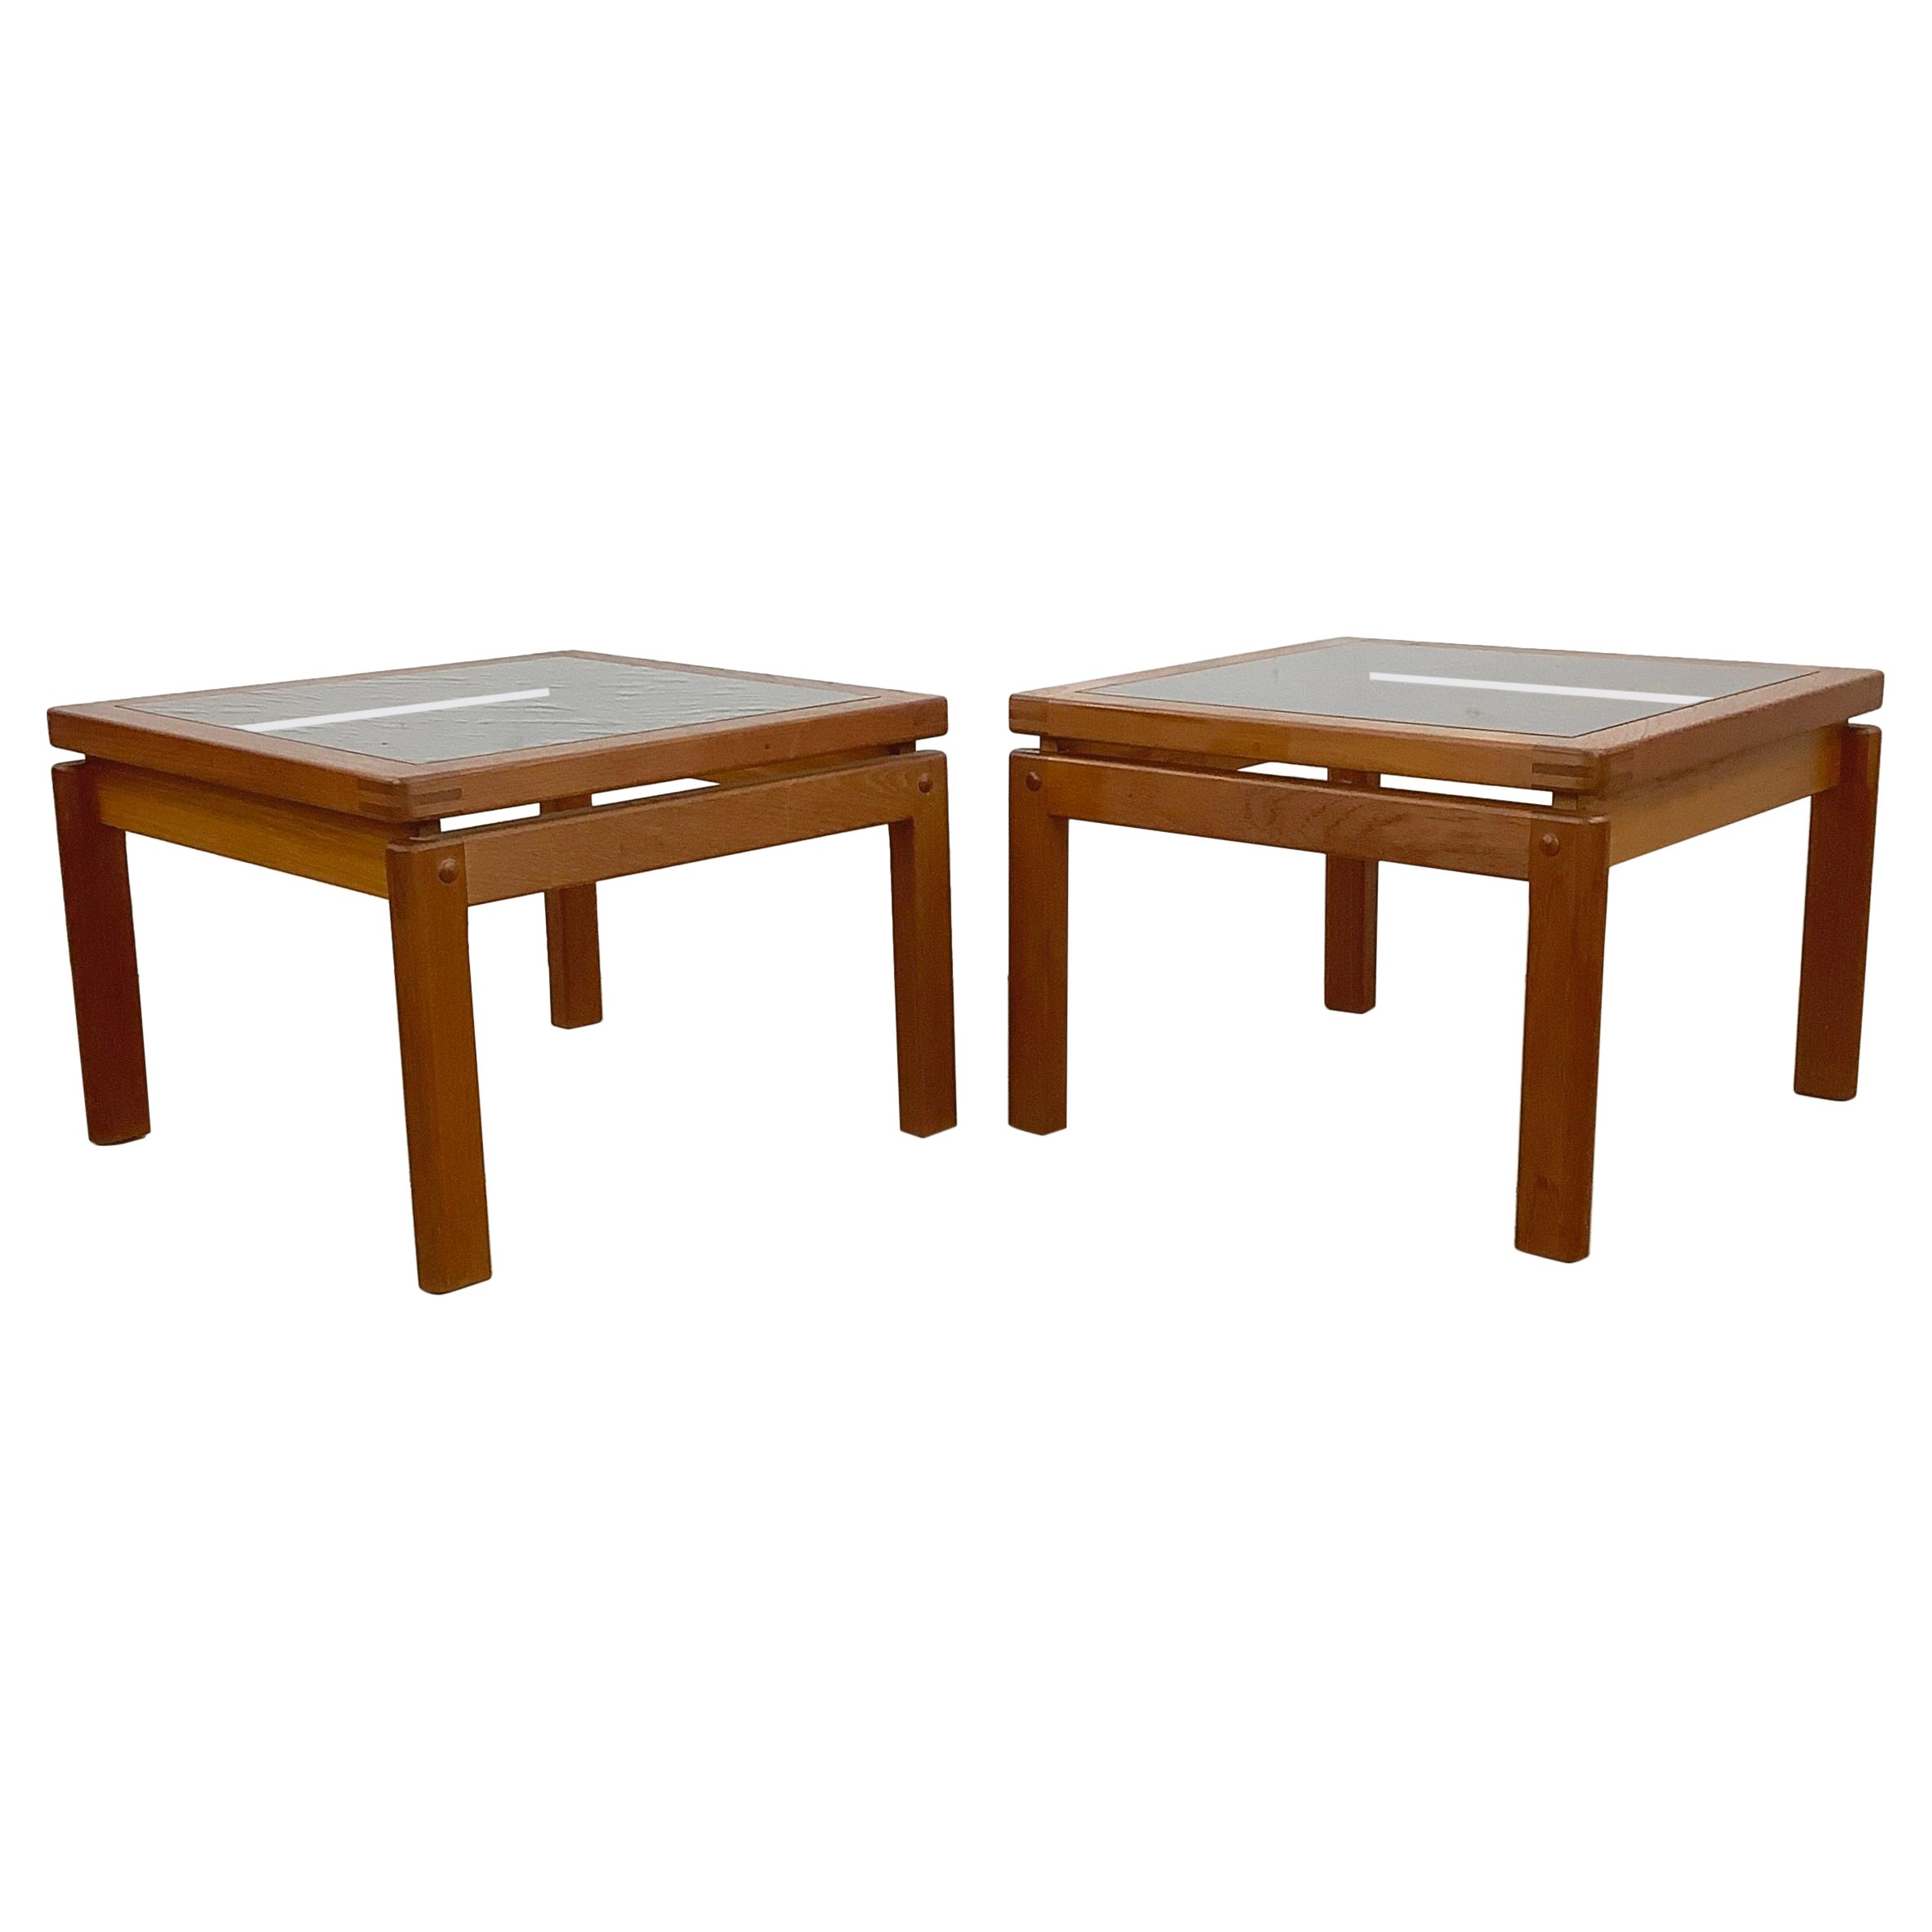 Pair Scandinavian Modern End Tables With Teak Joinery For Sale